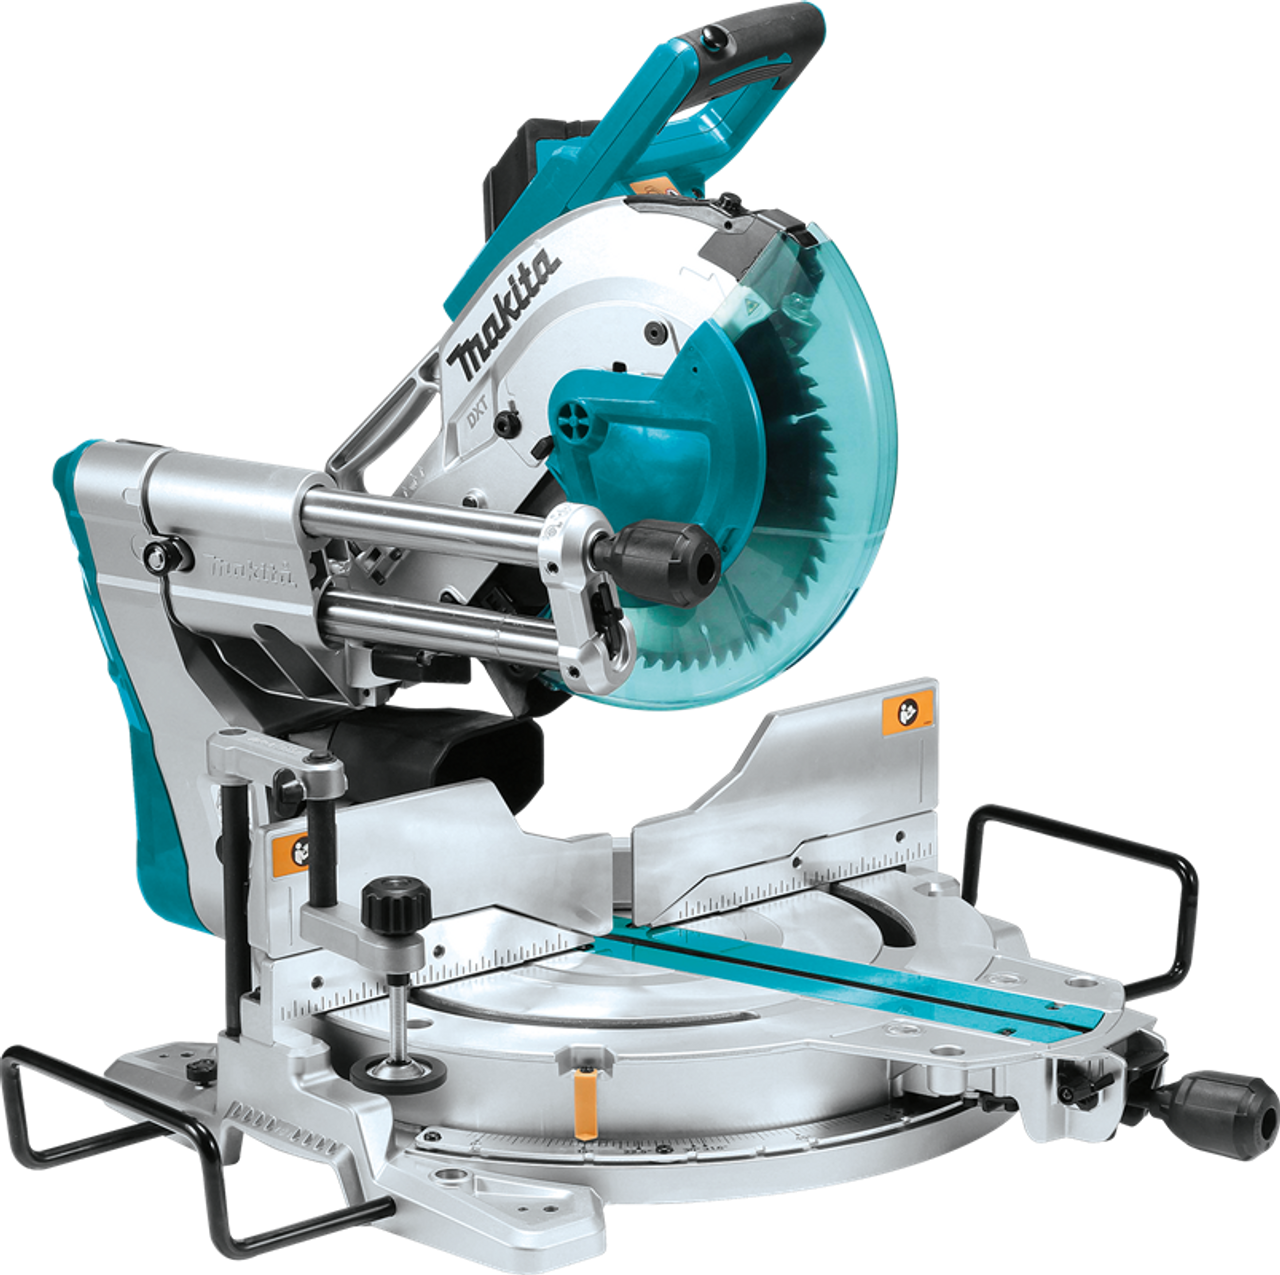 10" Dual-Bevel Sliding Compound Miter Saw with Laser and Stand, Unique 2-Steel, LS1019LX